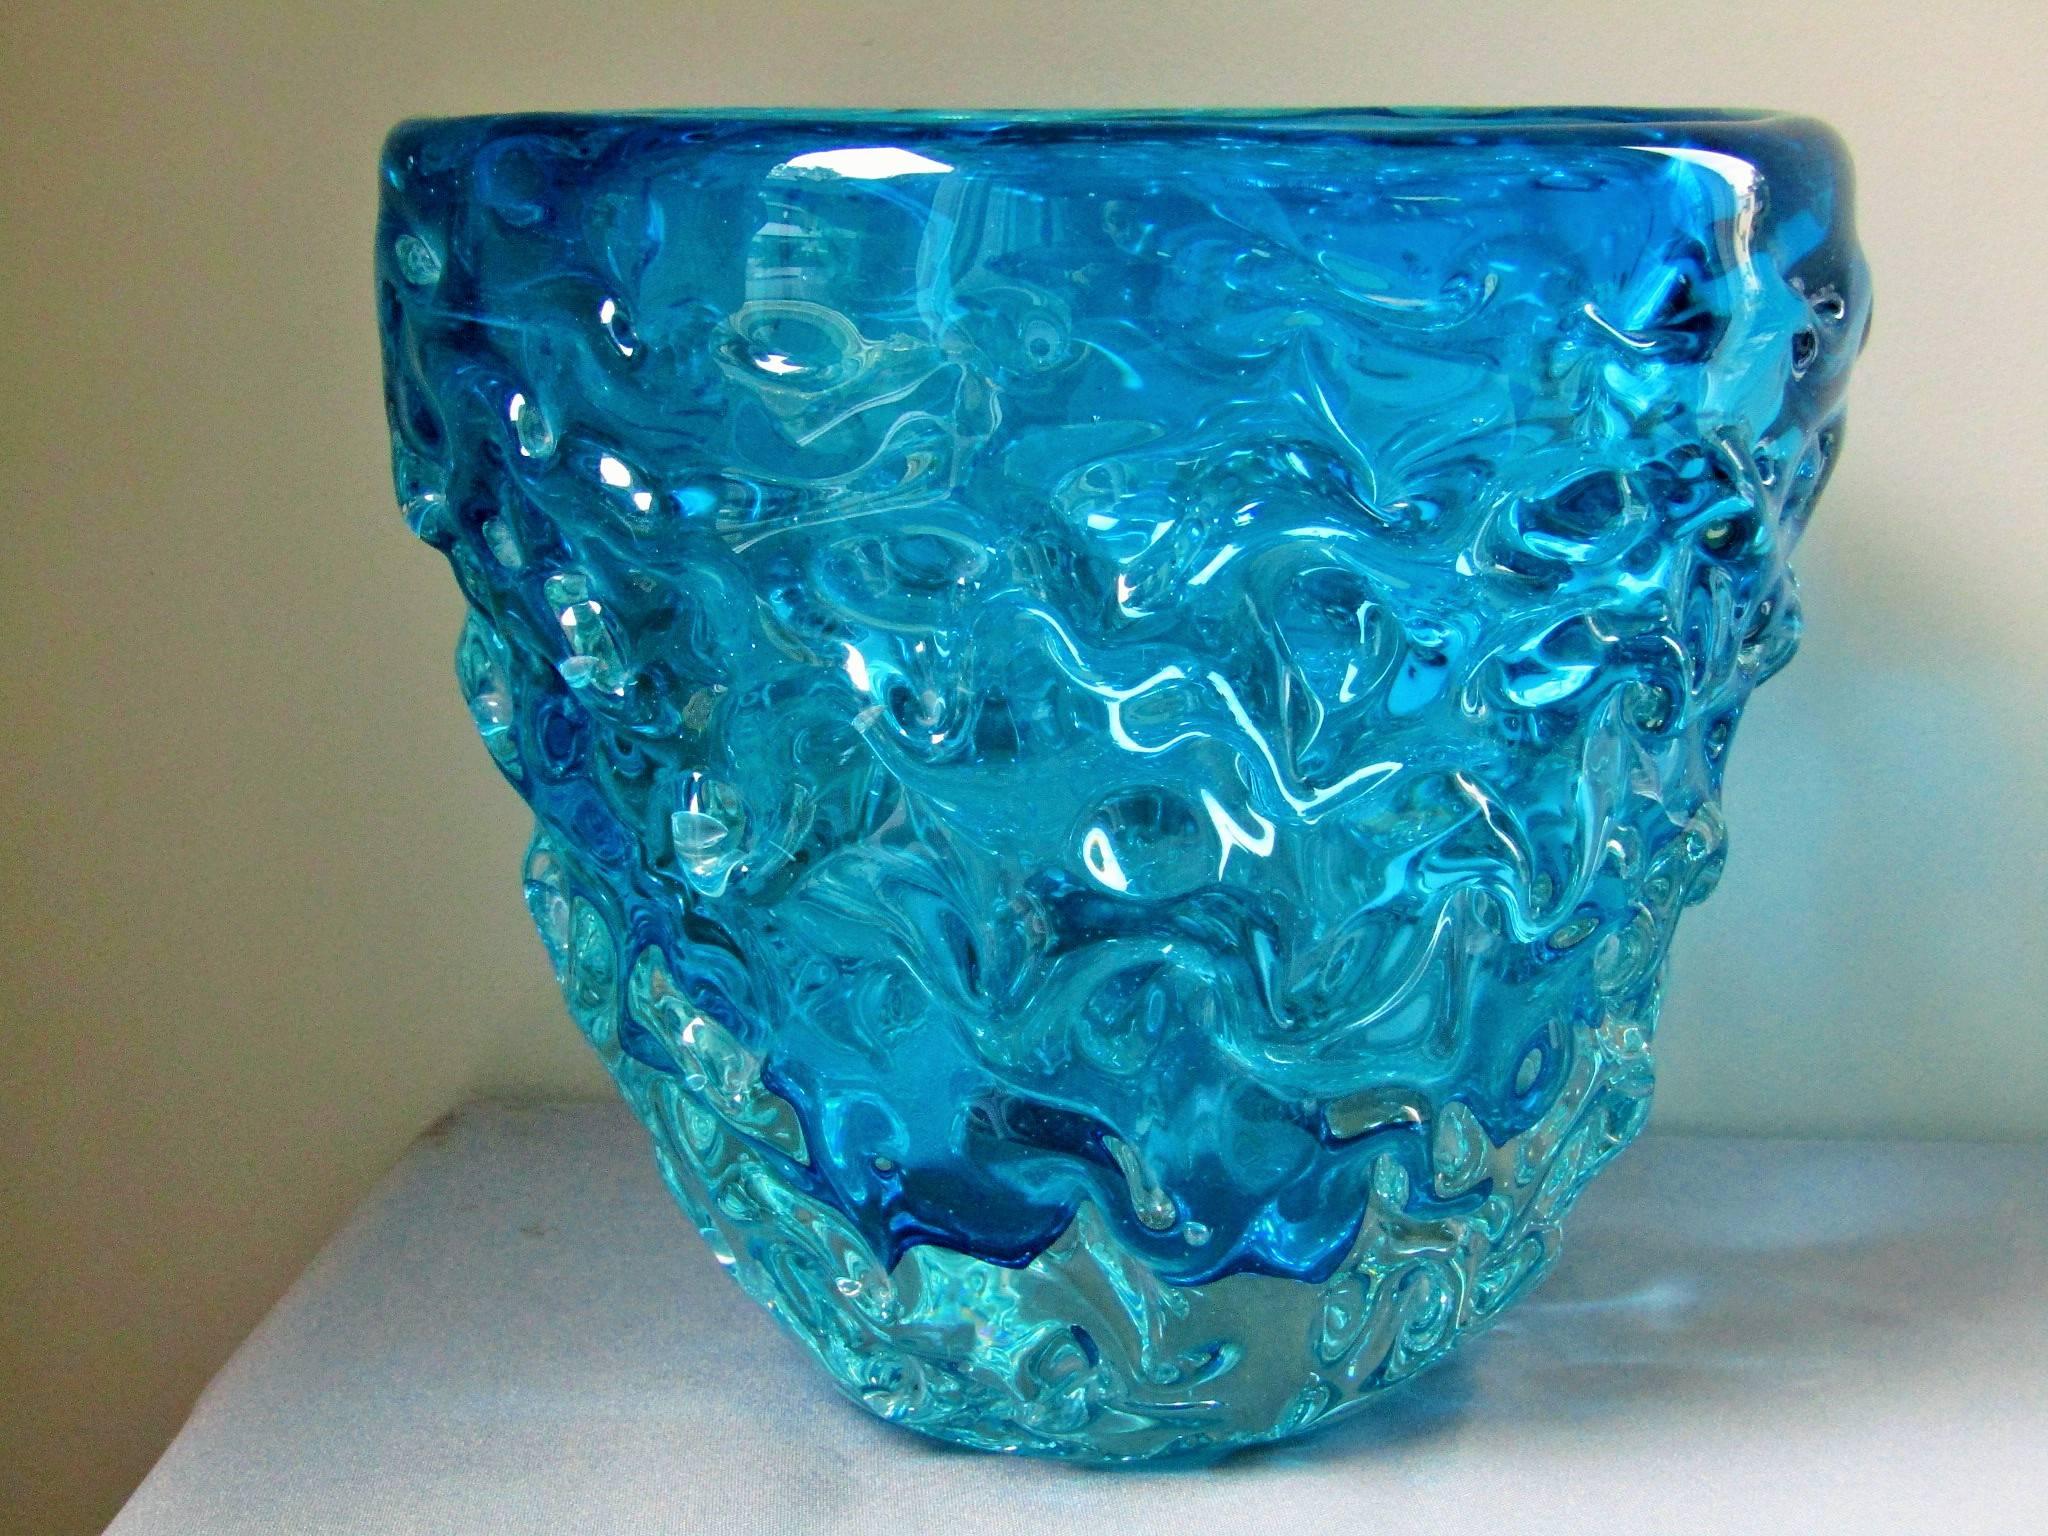 Mid-Century Modern Midcentury Centerpiece Bowl Vase Champagne Cooler Blue Murano Glass, Italy, 1960